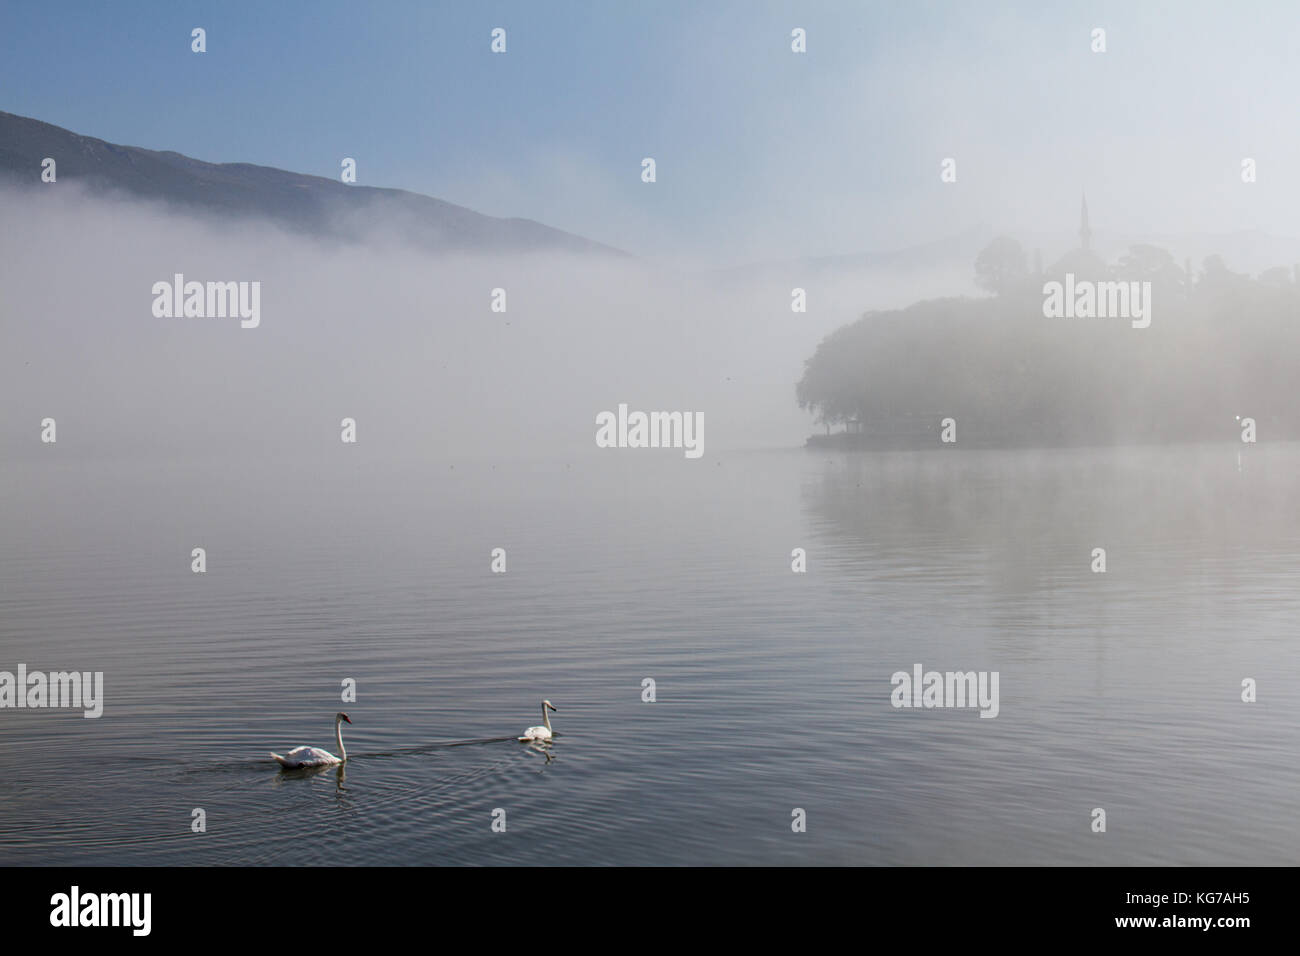 Atmospheric scene of swans on Lake Pamvotis on a misty morning in Ioannina, Greece, with Aslan Pasha mosque in the background Stock Photo